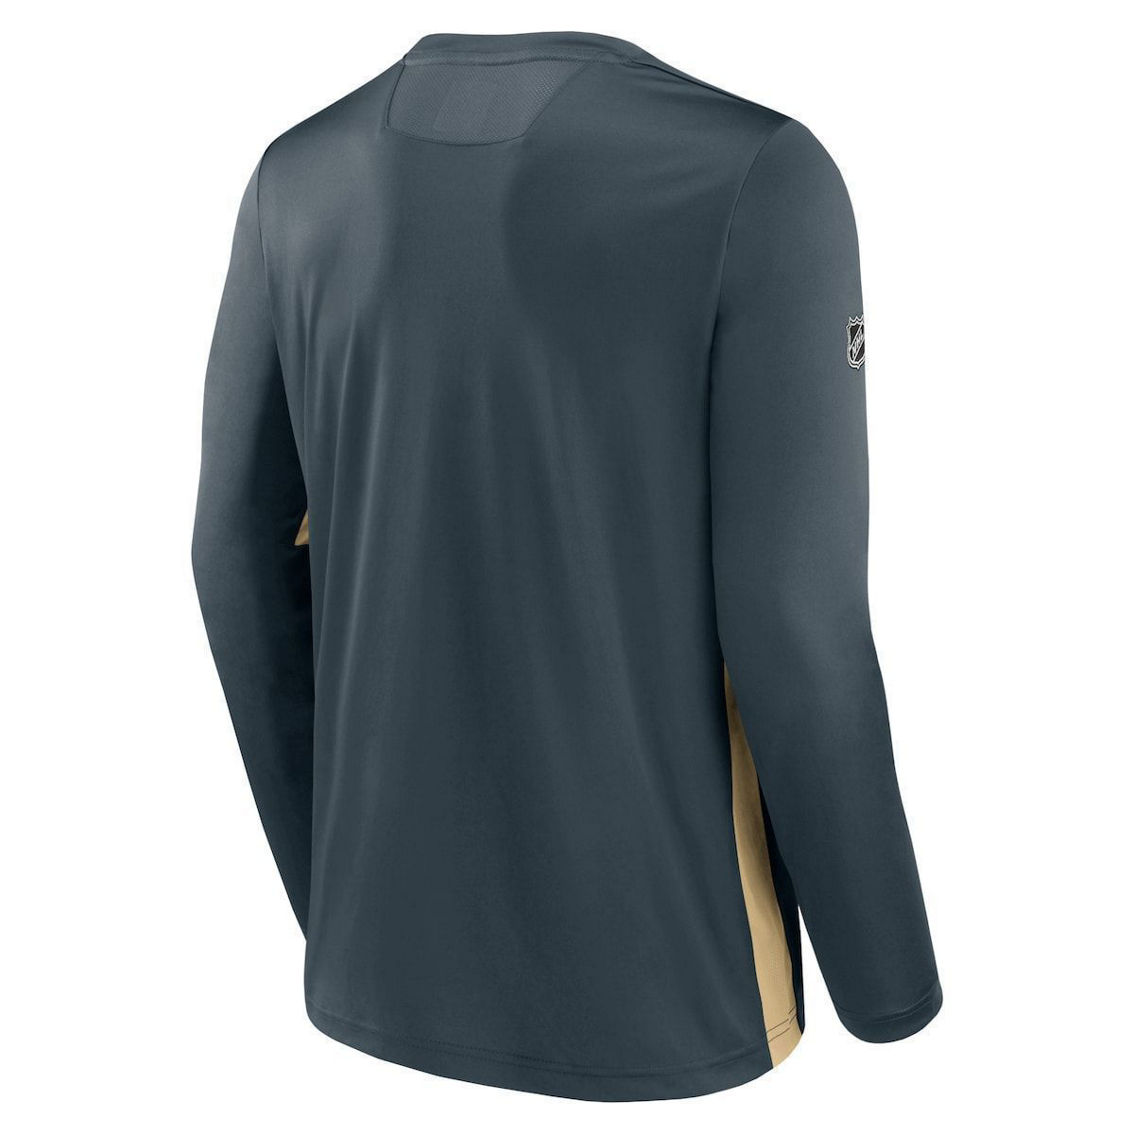 Fanatics Branded Men's Gray Vegas Golden Knights Authentic Pro Rink Performance Long Sleeve T-Shirt - Image 4 of 4